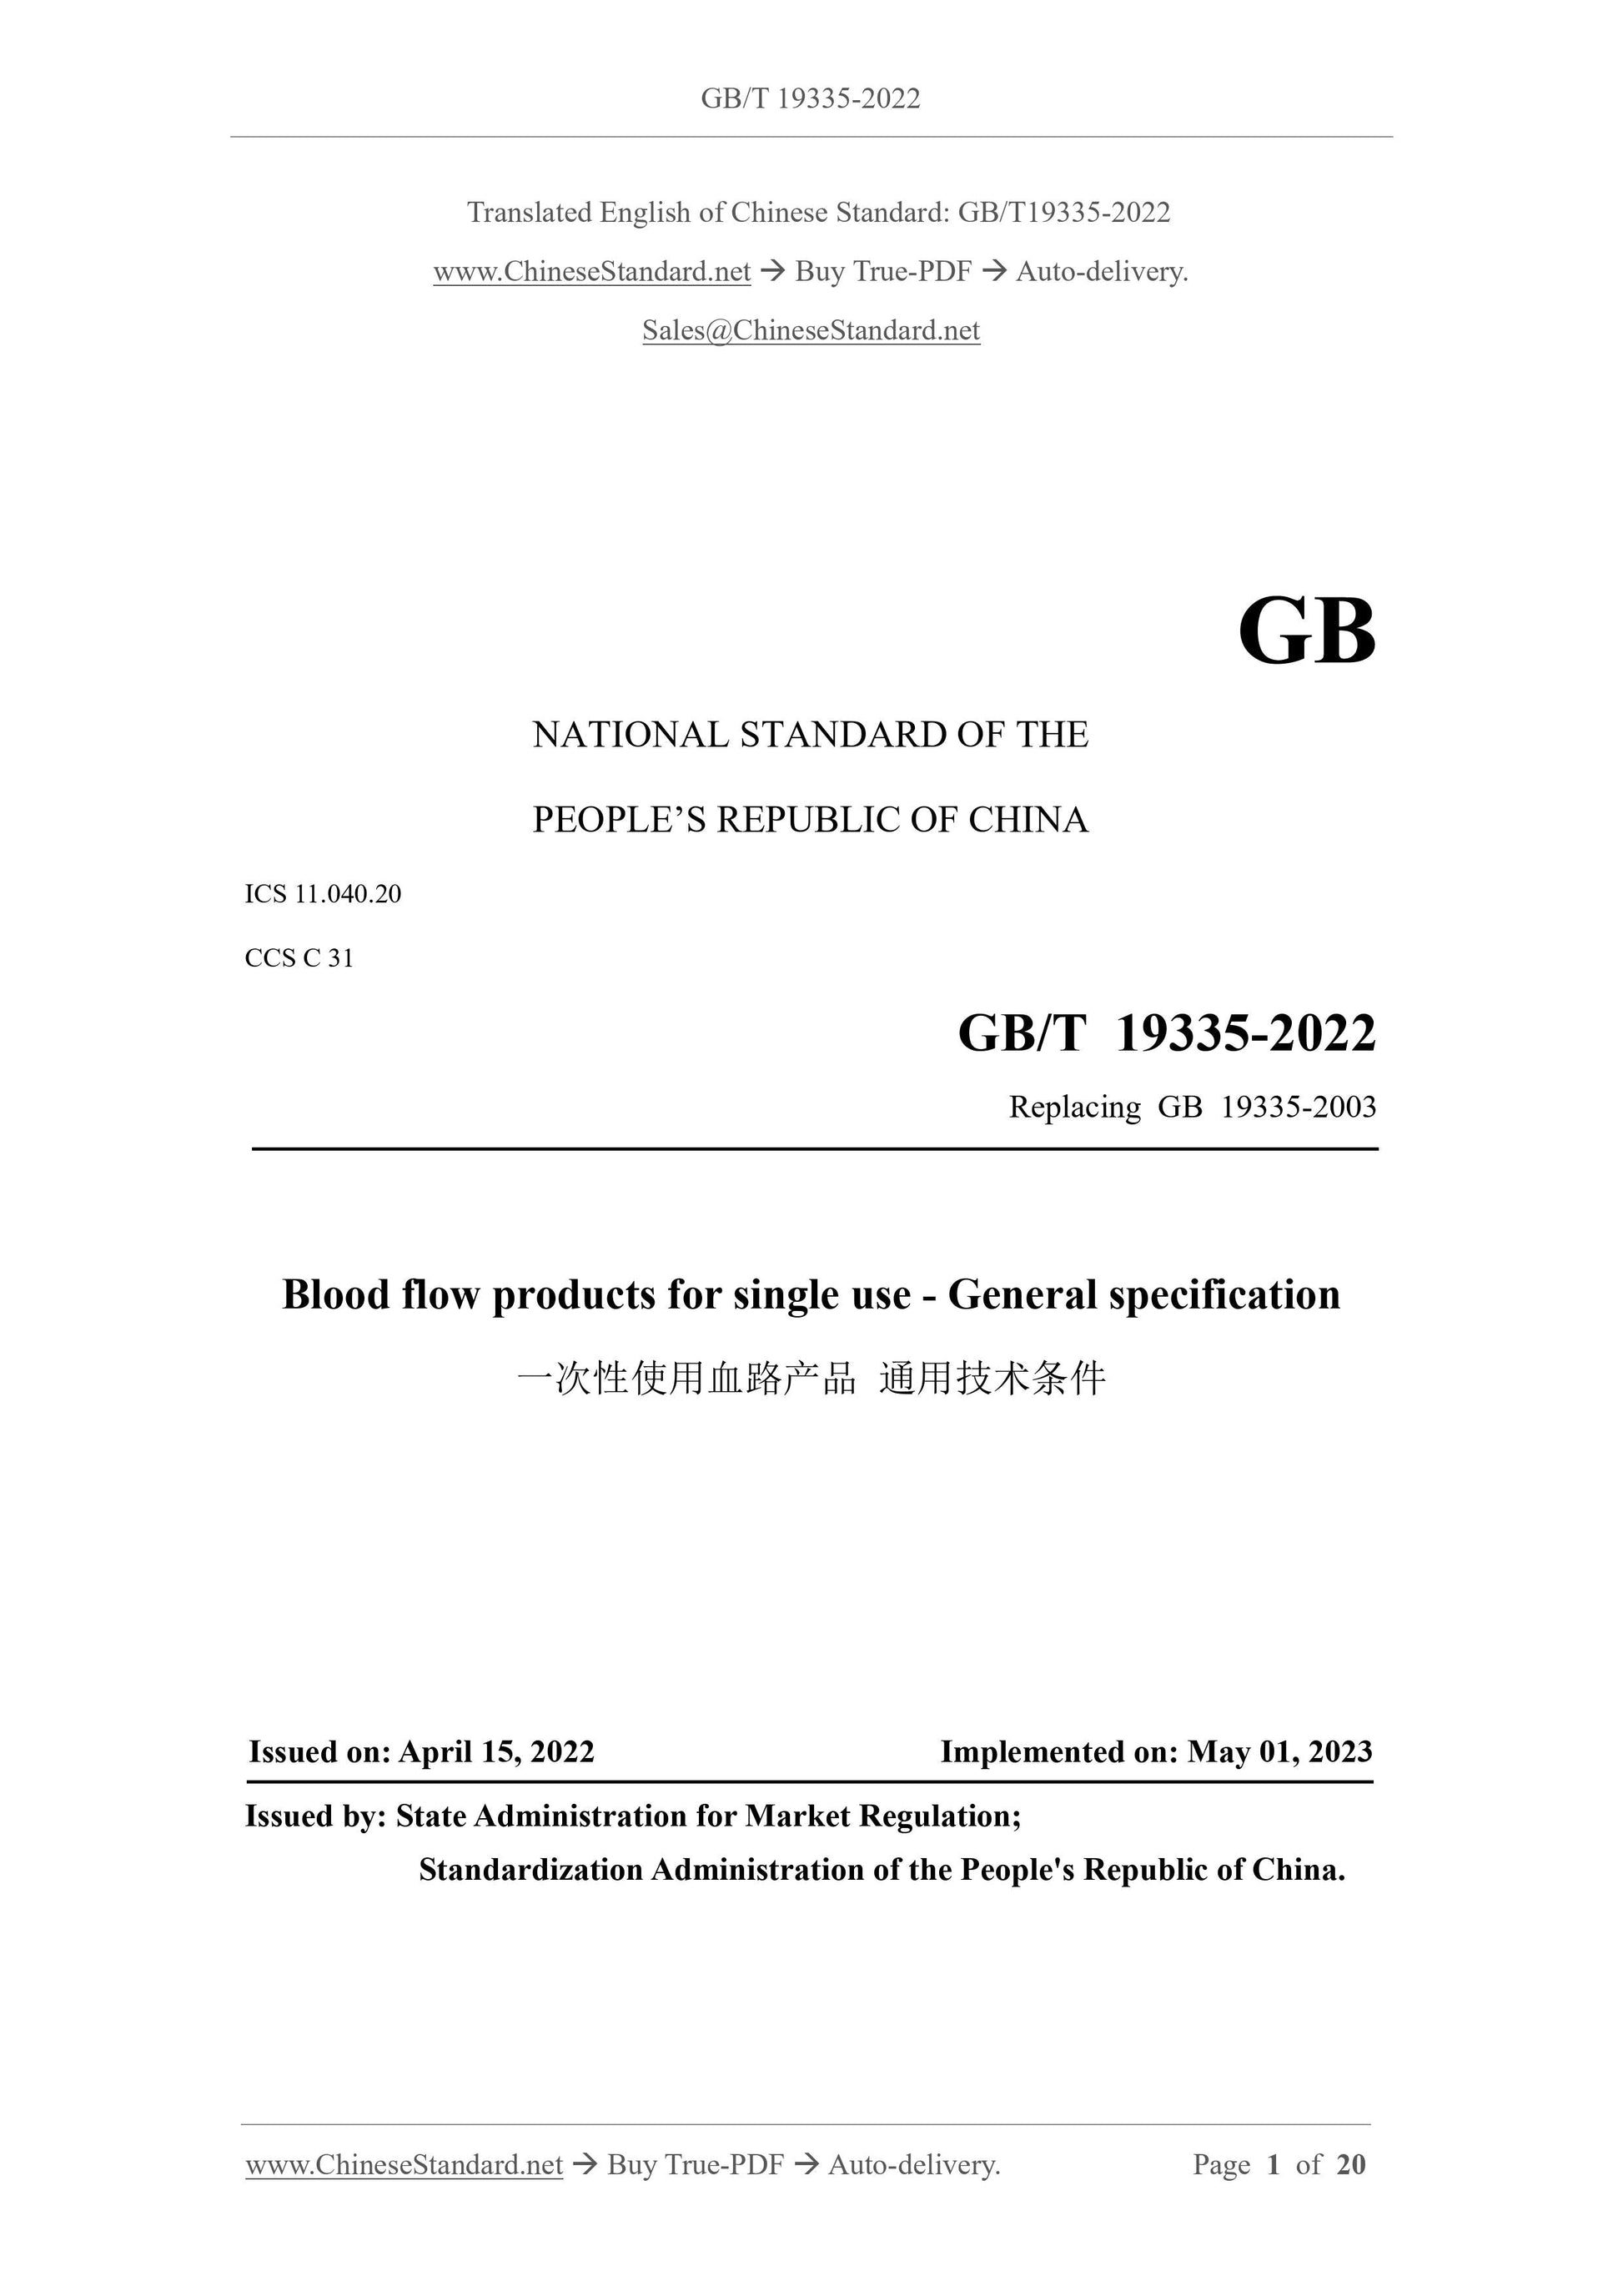 GB/T 19335-2022 Page 1